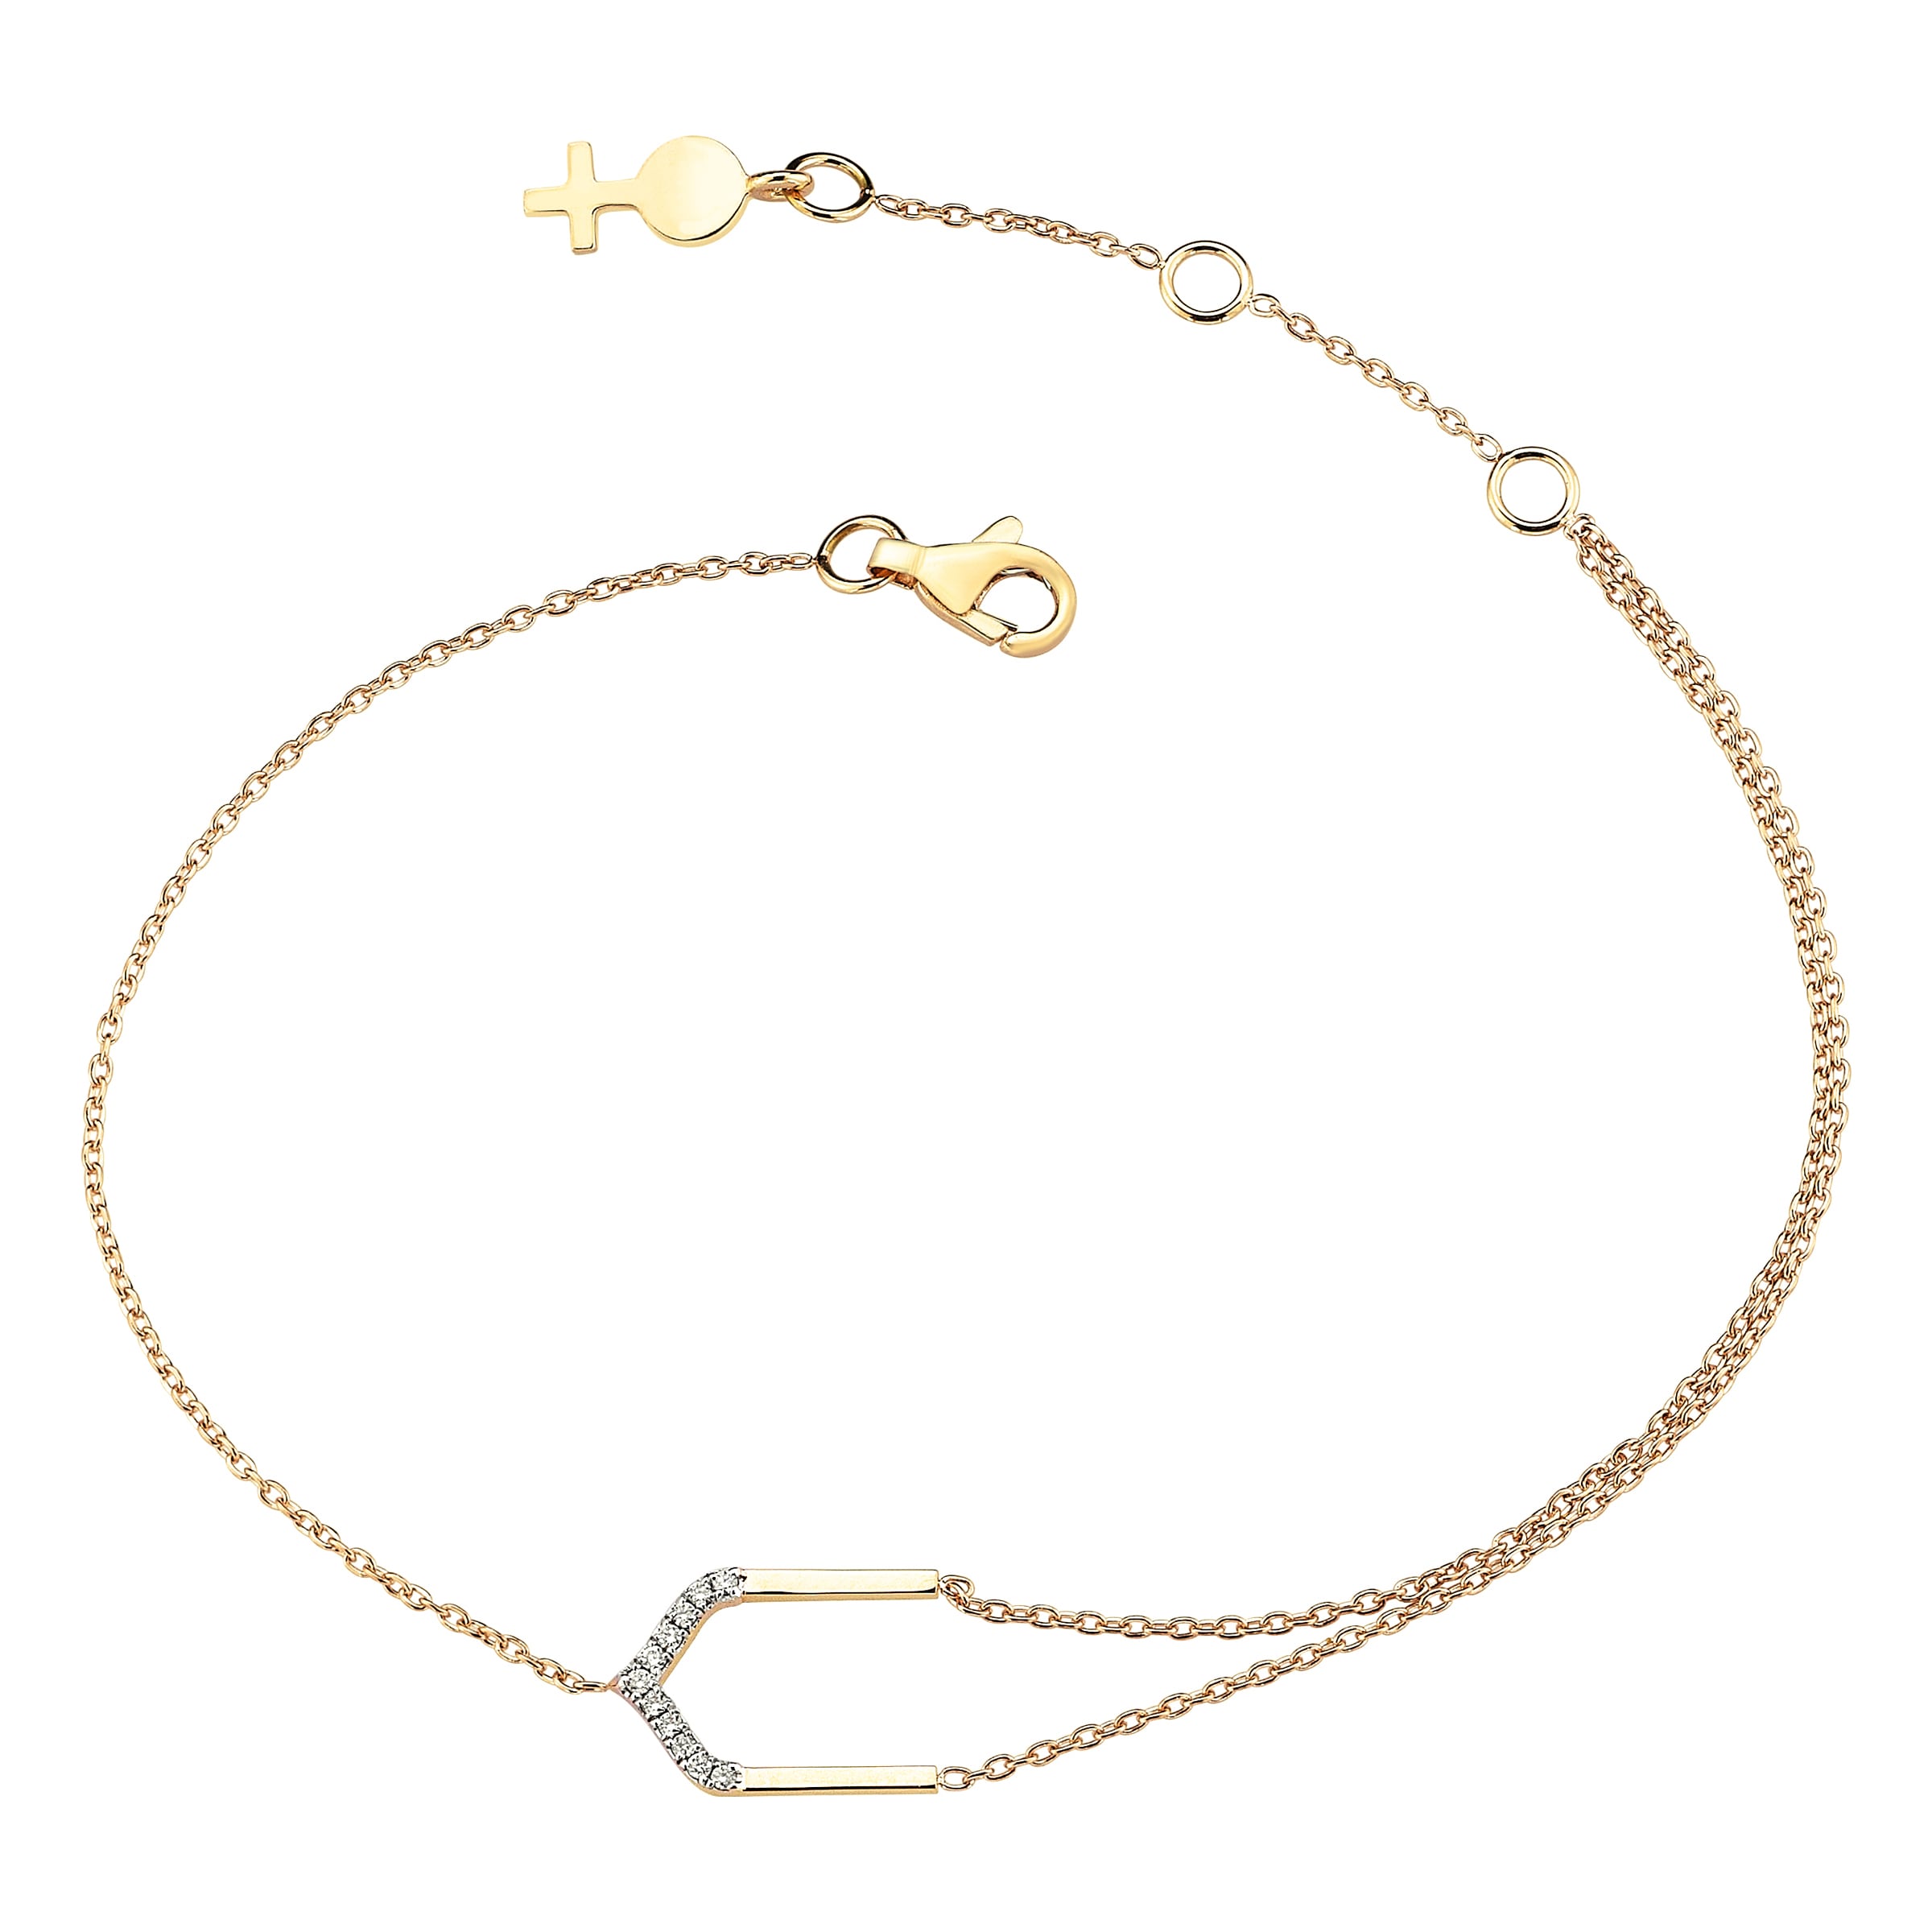 Four Centered Arch Bracelet in Yellow Gold - Her Story Shop